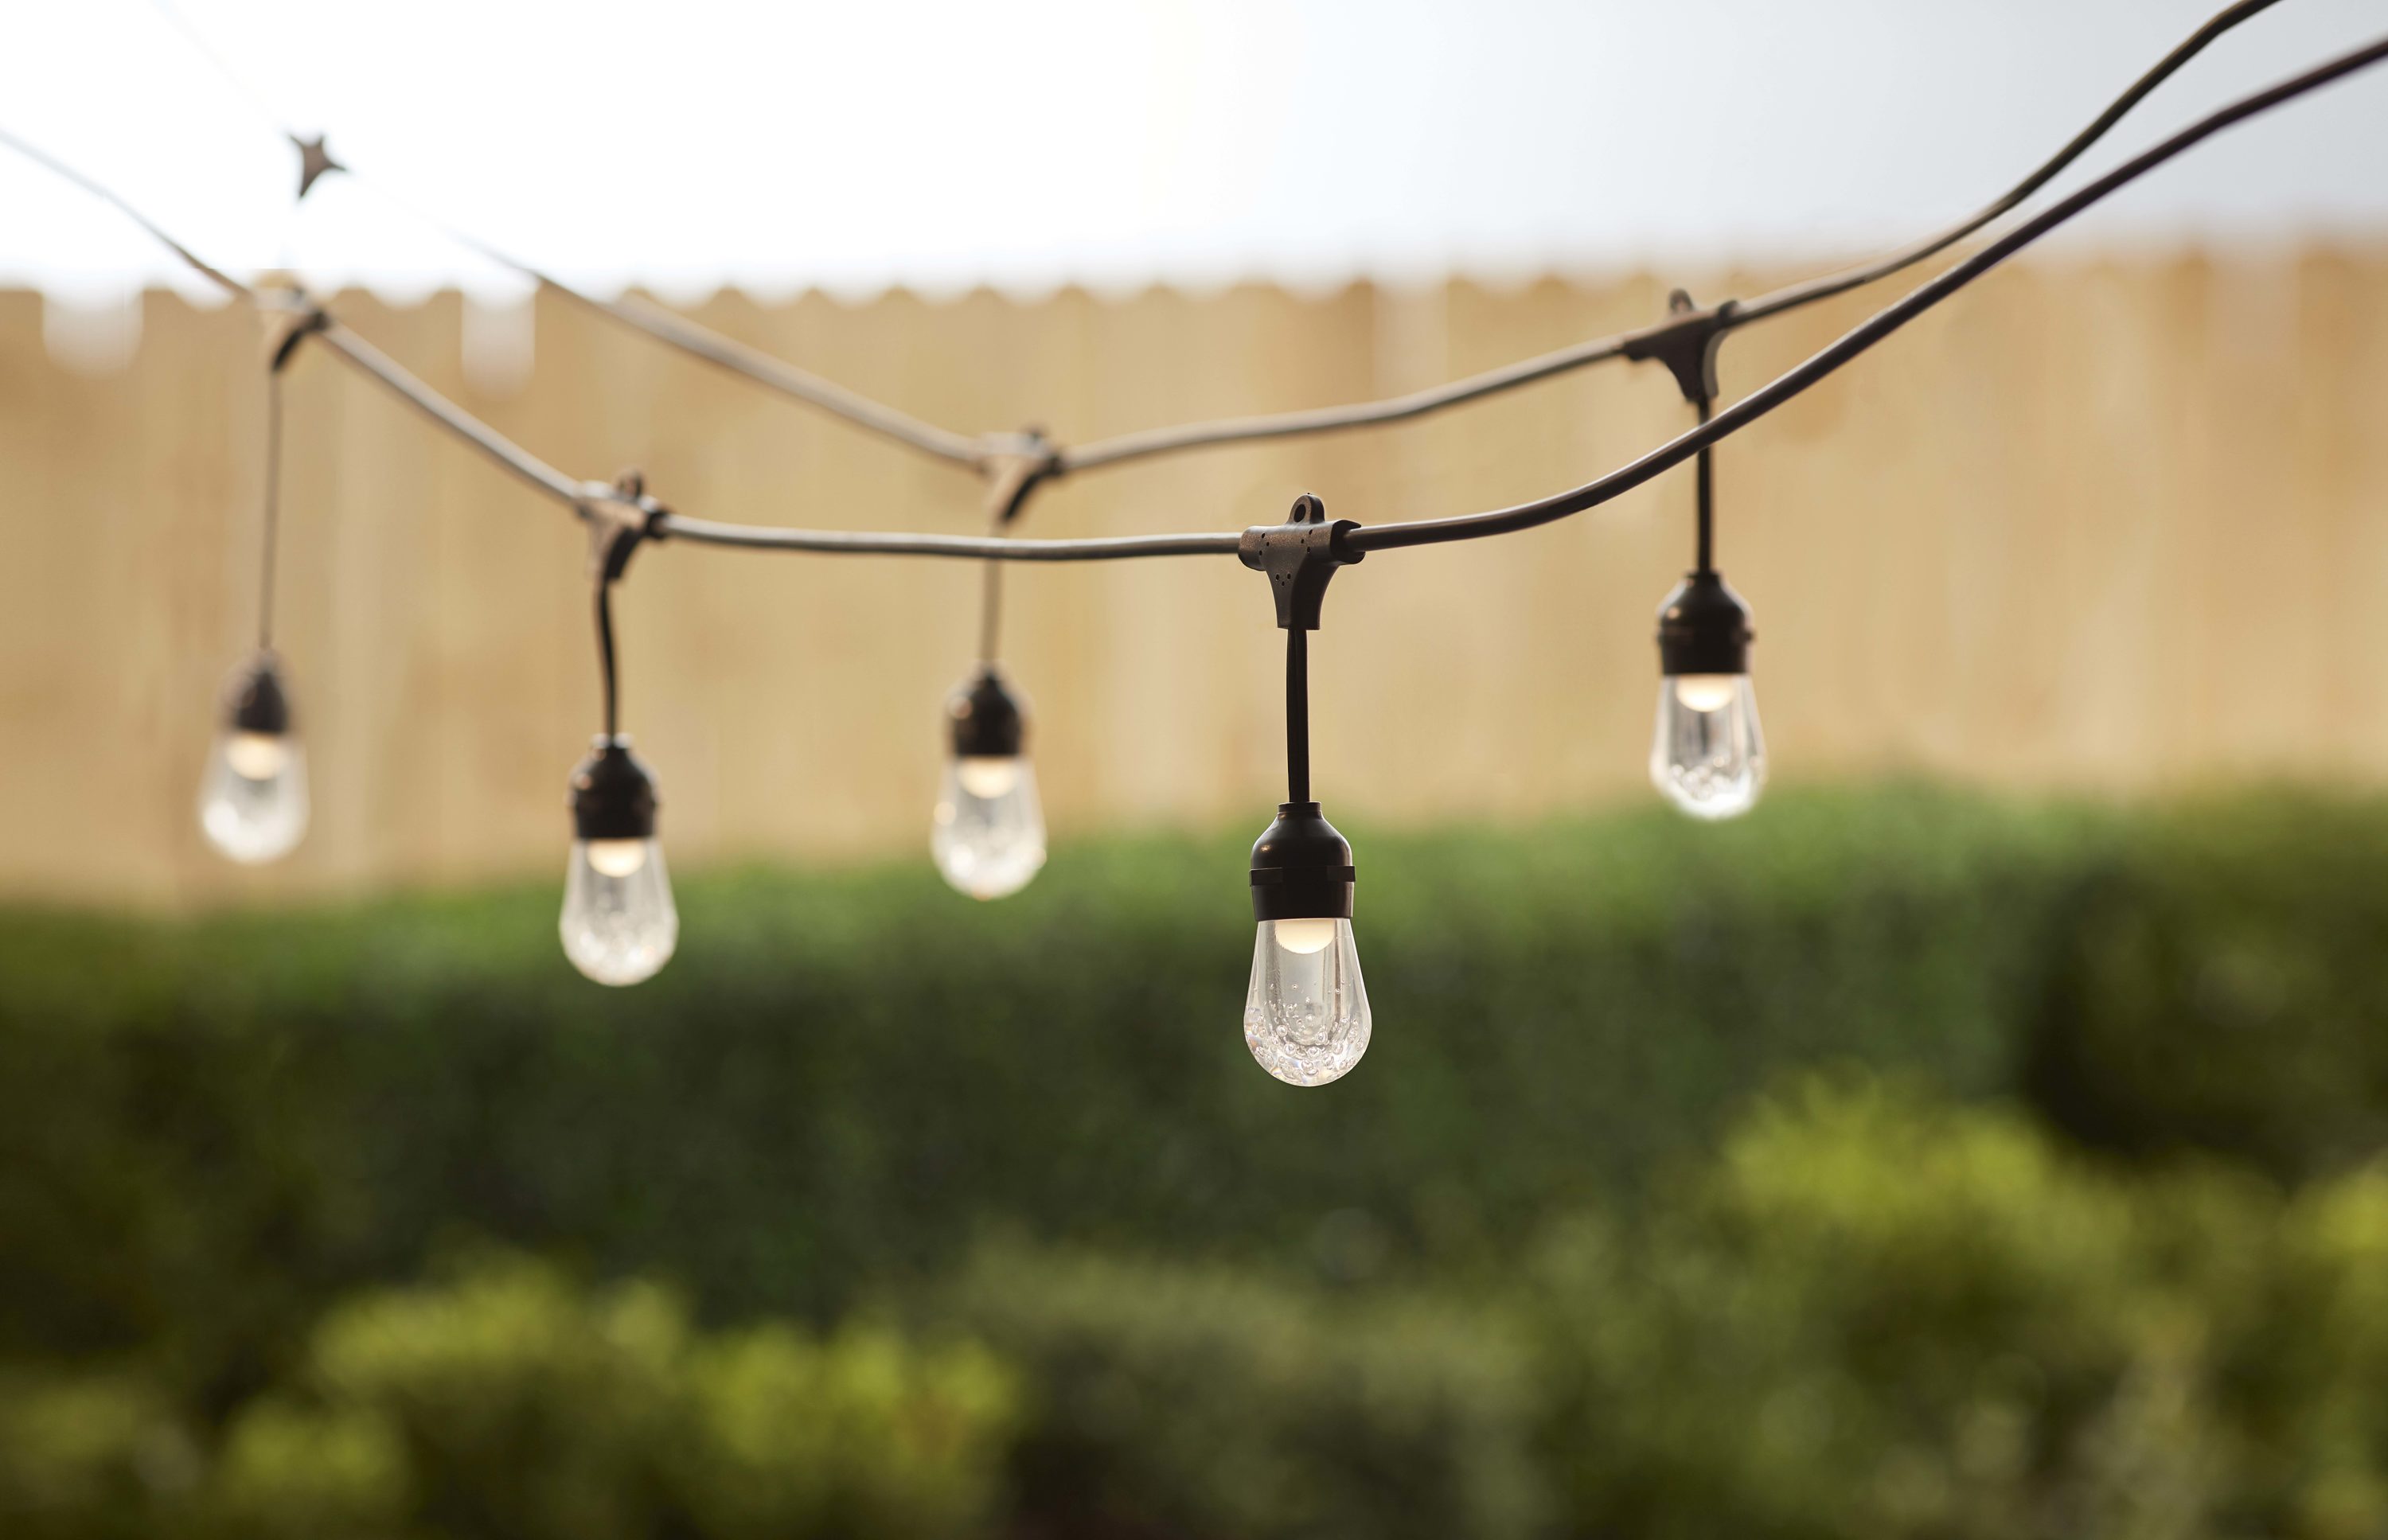 Luminar Outdoor 12 Bulb Color Changing LED String Lights  Take family time  outside by creating a unique space in your backyard. Introducing our Luminar  Outdoor 12 Bulb Color Changing LED String